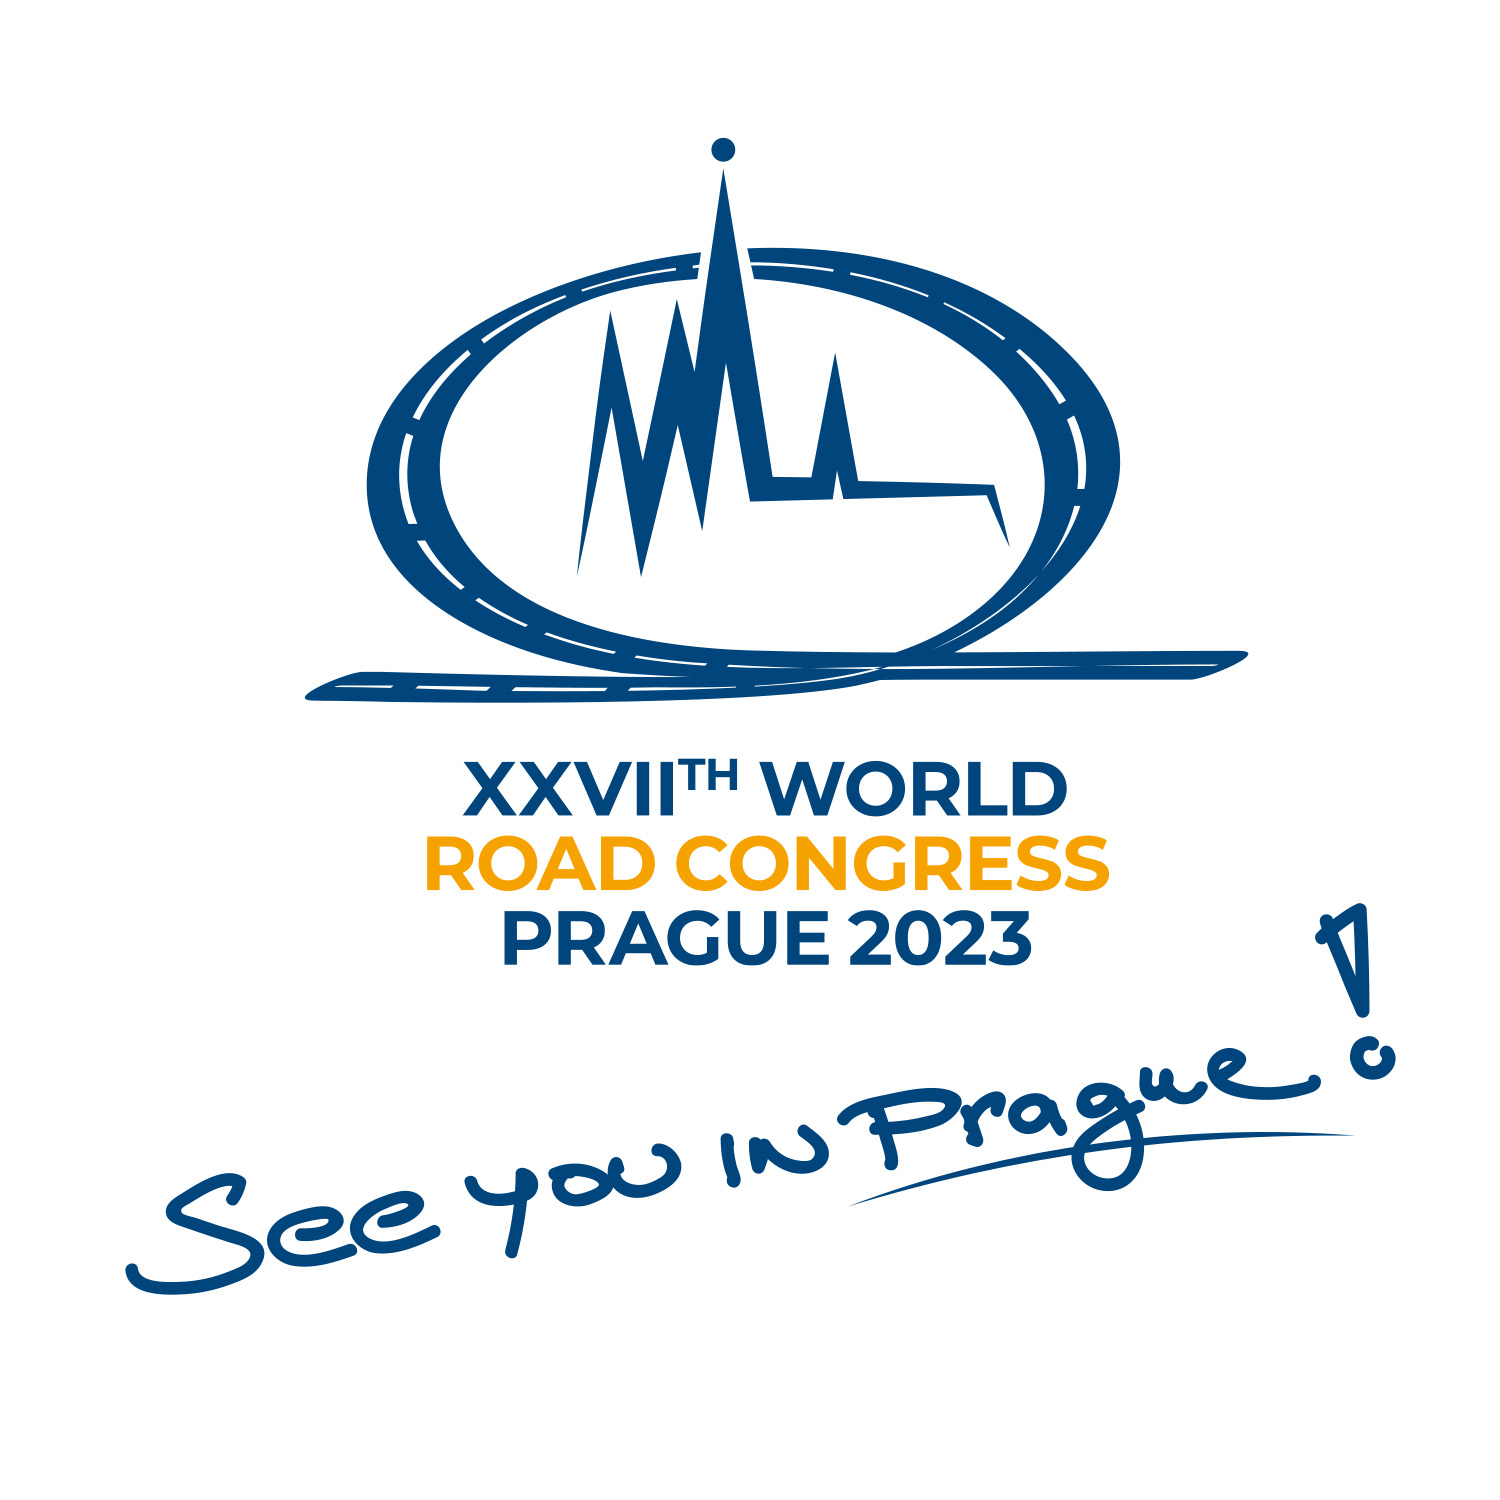 See you in Prague!